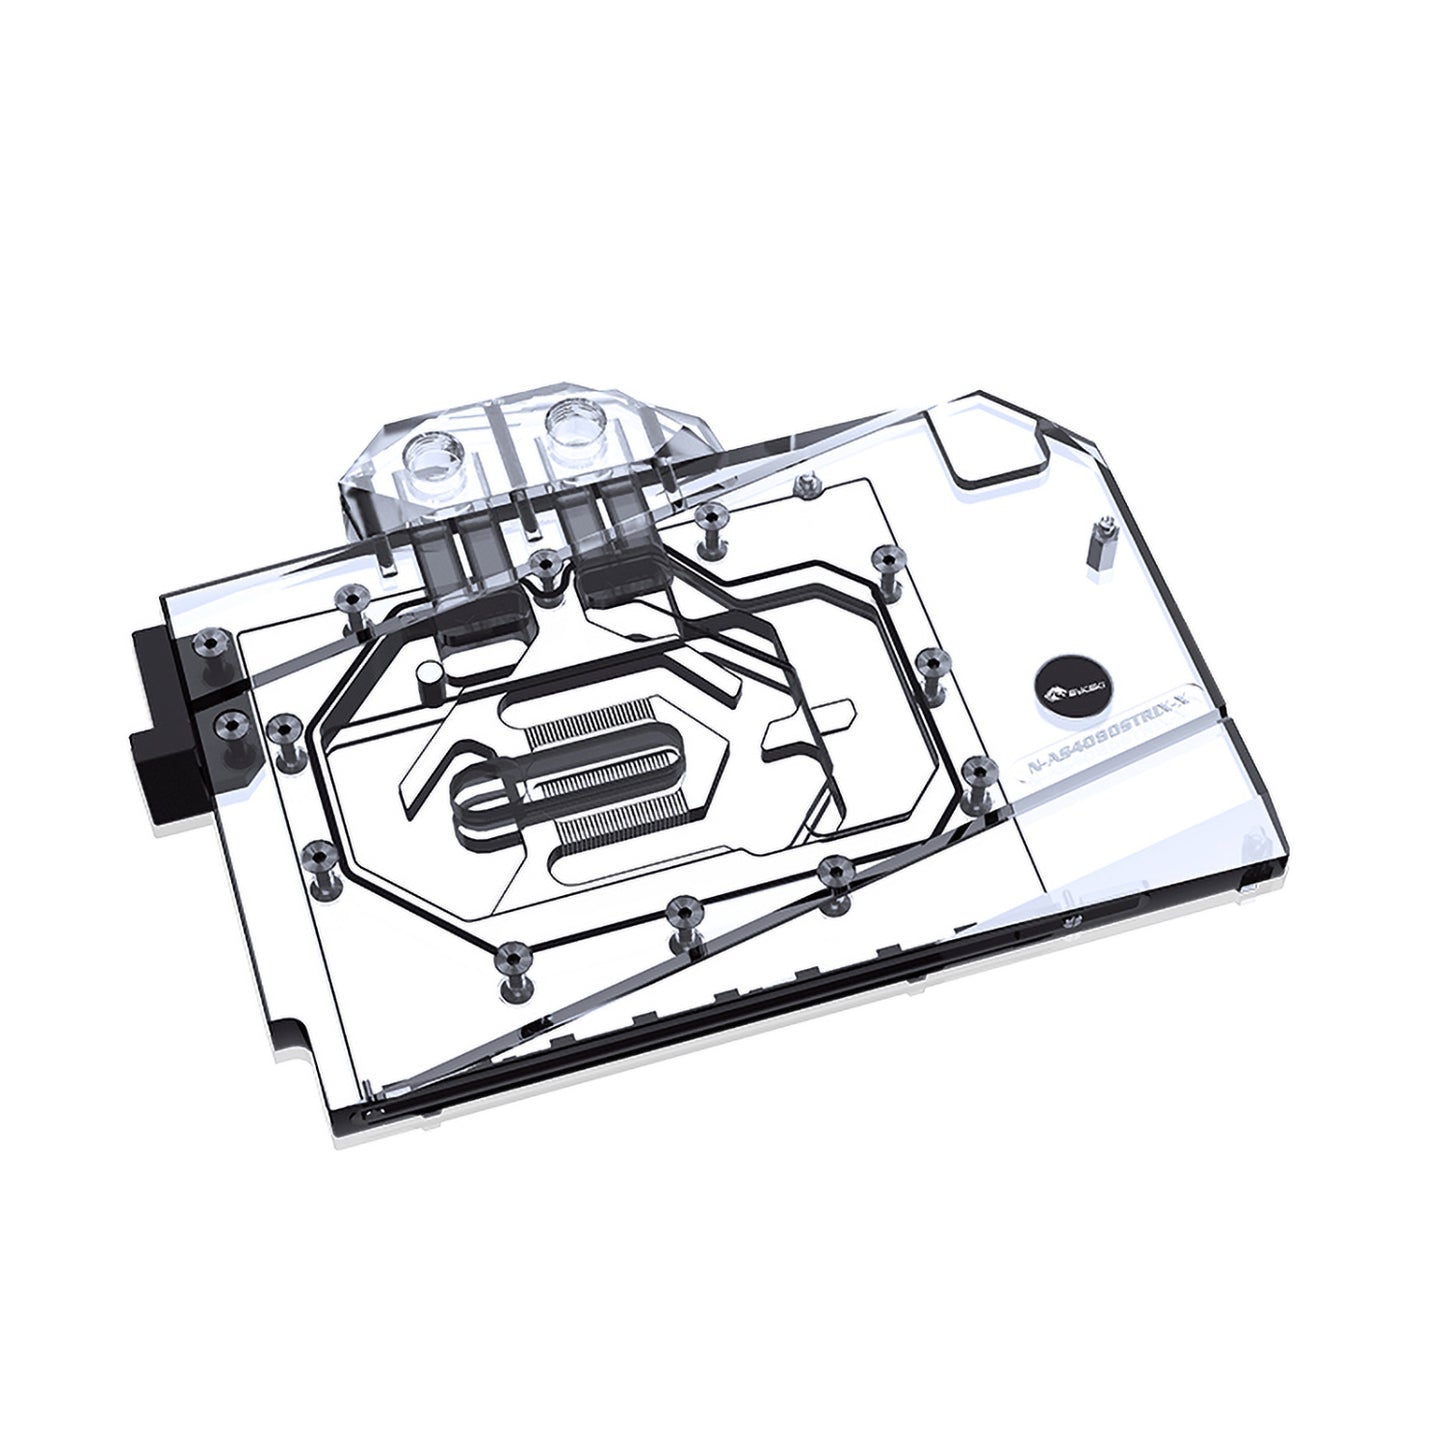 Bykski GPU Water Block For Asus RTX 4080 / 4080 Super Tuf Gaming / ROG Strix, Full Cover With Backplate PC Water Cooling Cooler, N-AS4080STRIX-X